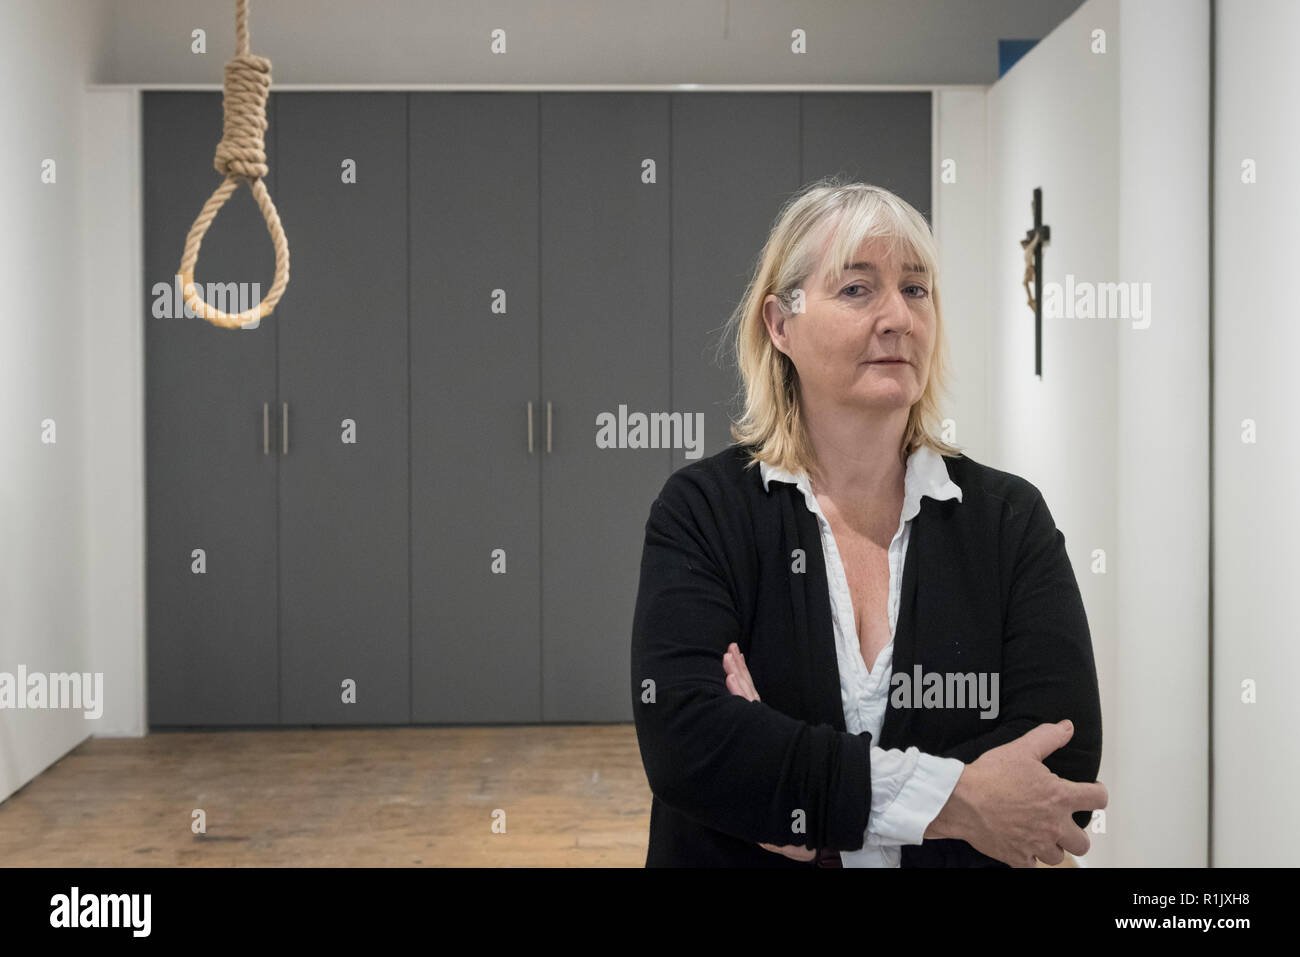 London, UK.  13 November 2018. Artist Christina Reihill poses with a hangman's noose.  Preview of "Glad I Did It", a new work by Irish artist Christina Reihill at Bermondsey Project Space.  The interactive artwork looks at the life and death of Ruth Ellis, the last woman to be hanged in Britain, after she shot her lover, racing driver, David Blakely in 1955.  On display are the artist's interpretation of Ruth Ellis' prison cell, including furniture and props, the hanging room together with a video display of the artist in conversation. Credit: Stephen Chung/Alamy Live News Stock Photo